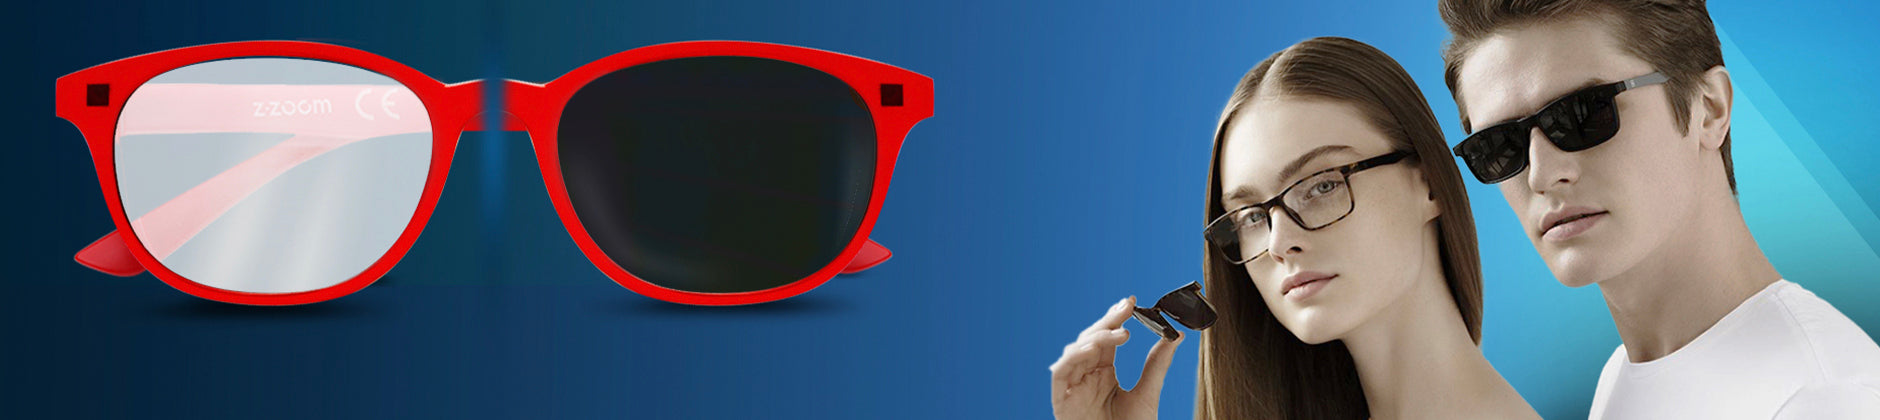 600nm Red Filter Forensic Safety Glasses - ANSI Z87.1 Certified